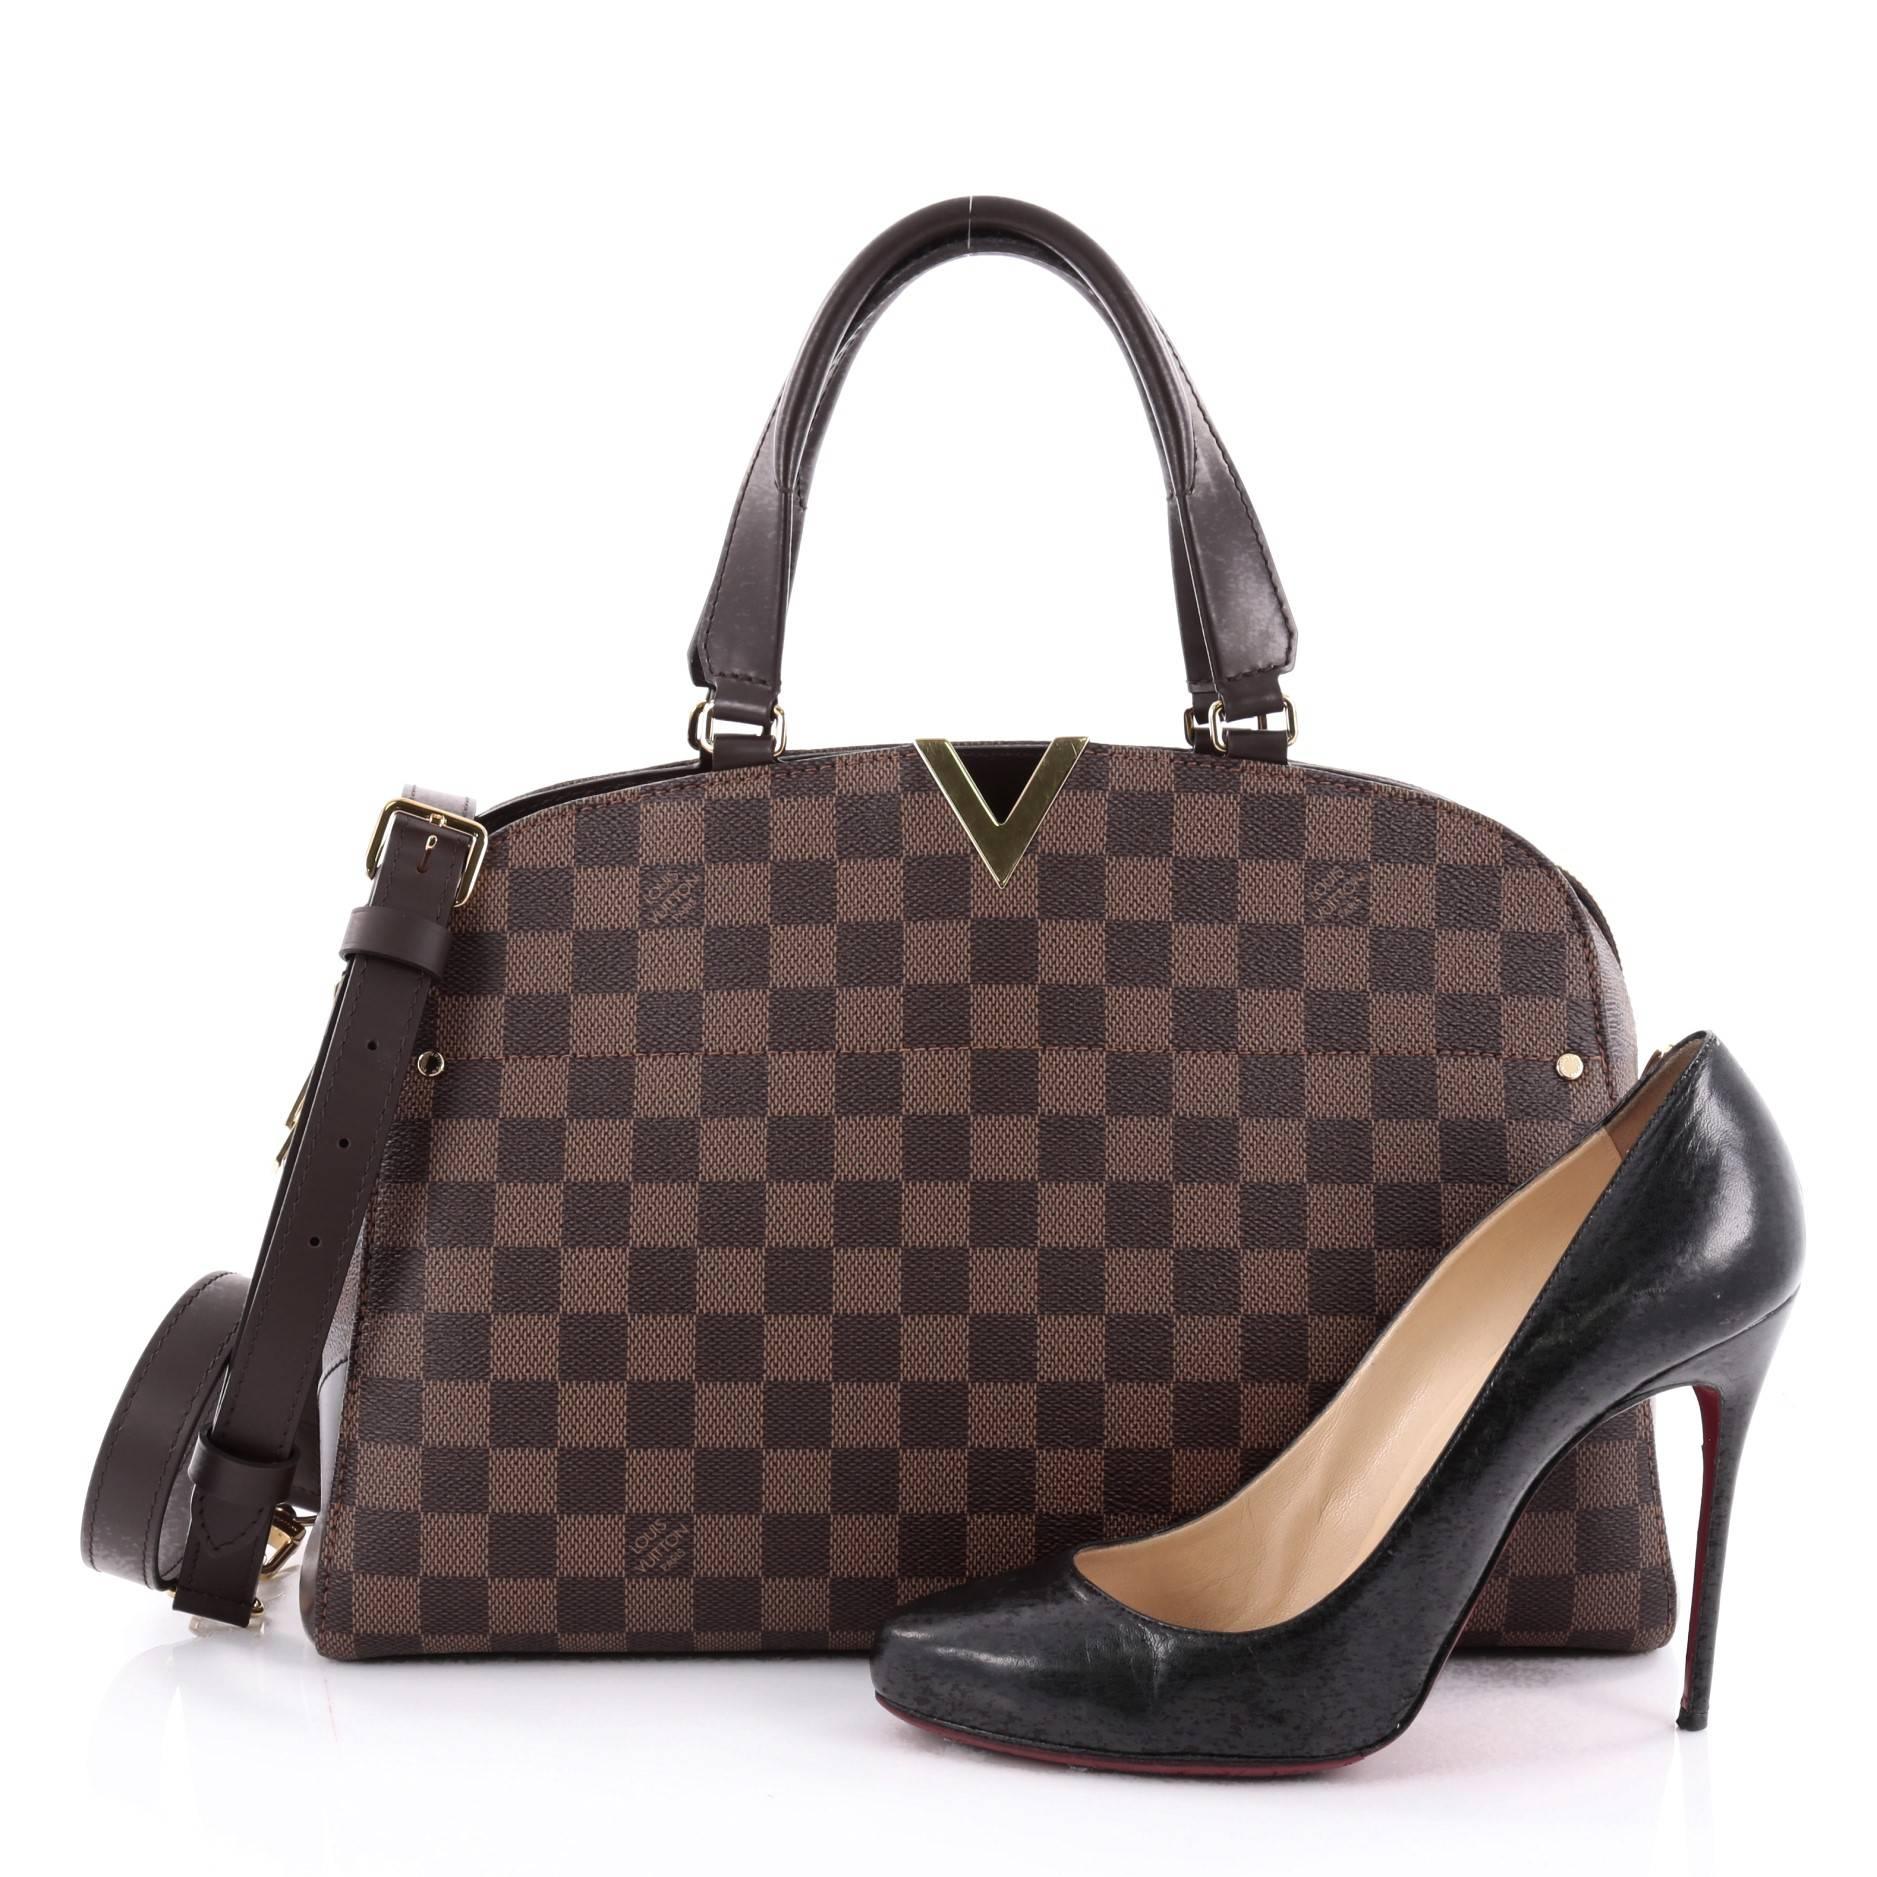 This authentic Louis Vuitton Kensington Bowling Bag Damier presented in the brand's Spring/Summer 2015 Collection is a chic and durable everyday bag made for the modern woman. Crafted from iconic Louis Vuitton’s damier ebene canvas, this bowling bag